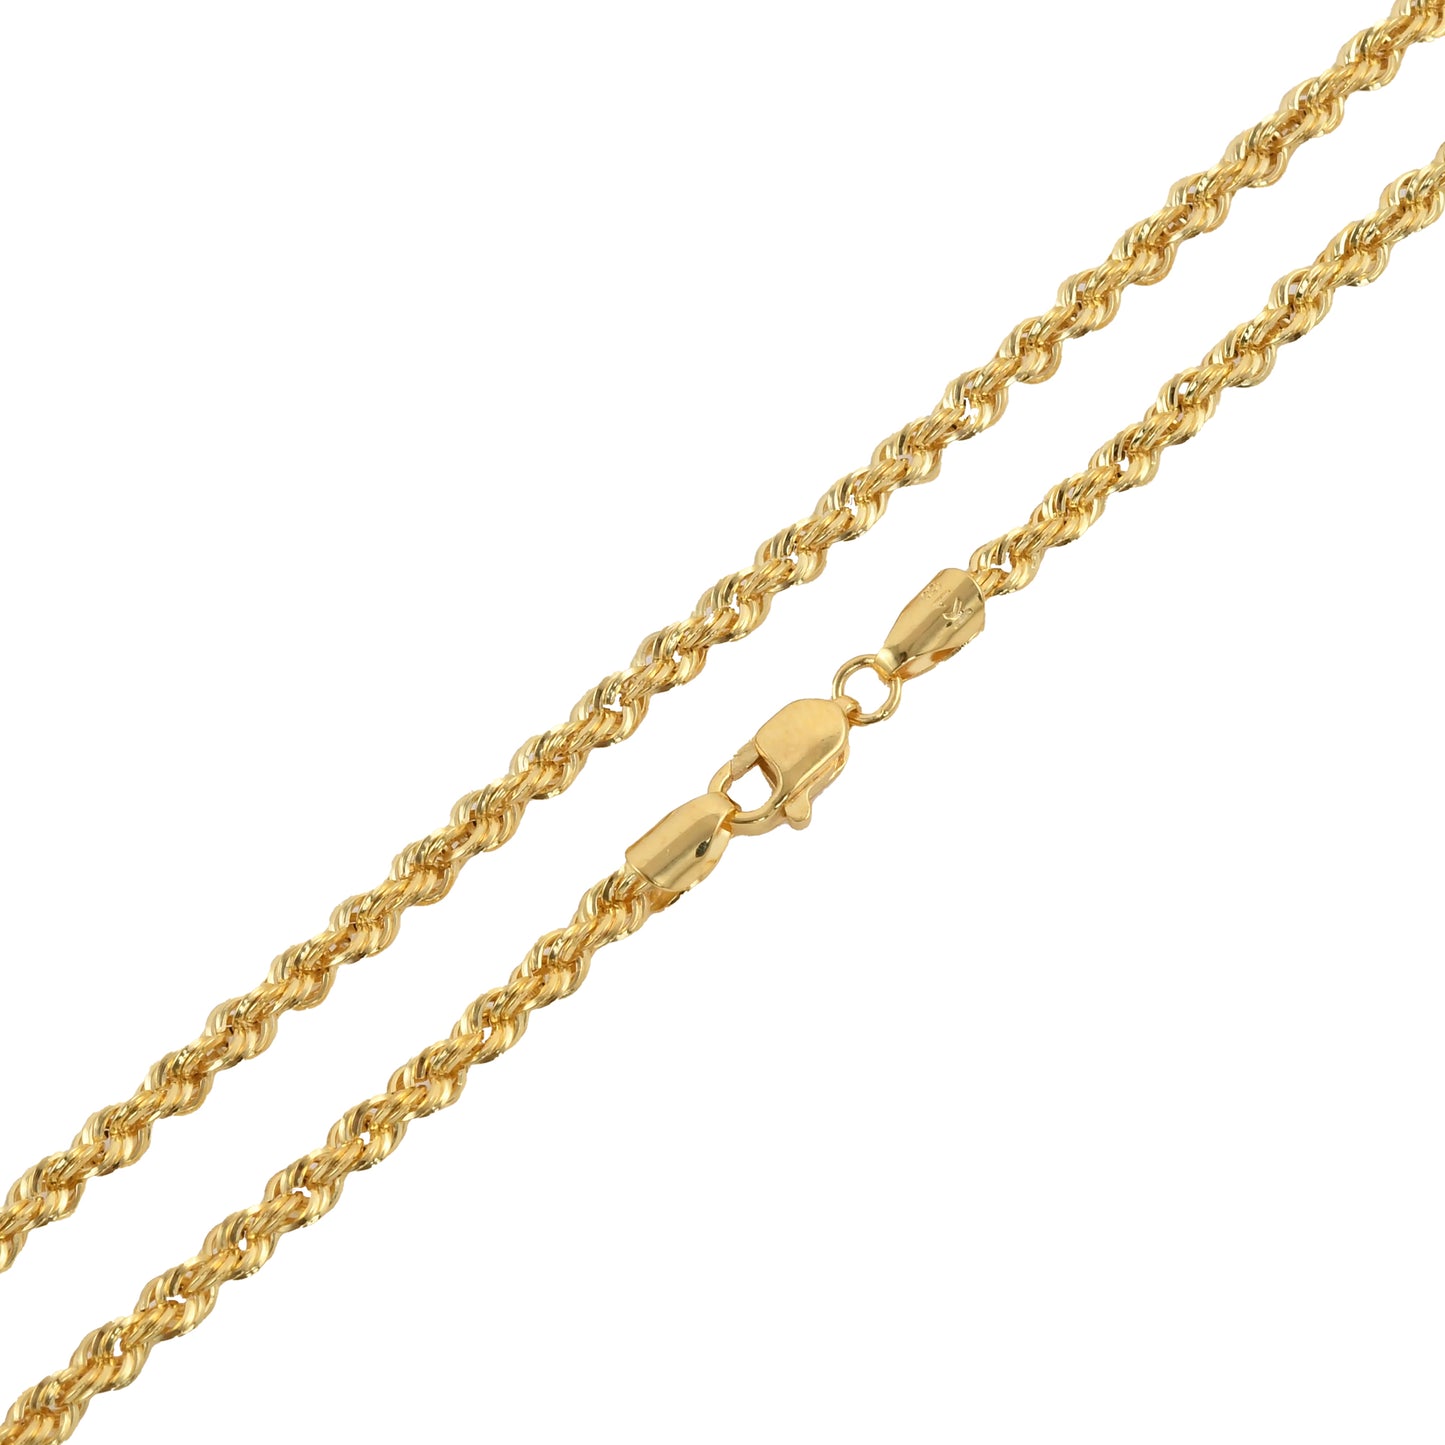 10k Yellow Gold 24'' 3mm Diamond Cut Rope Chain Necklace 5.2gm